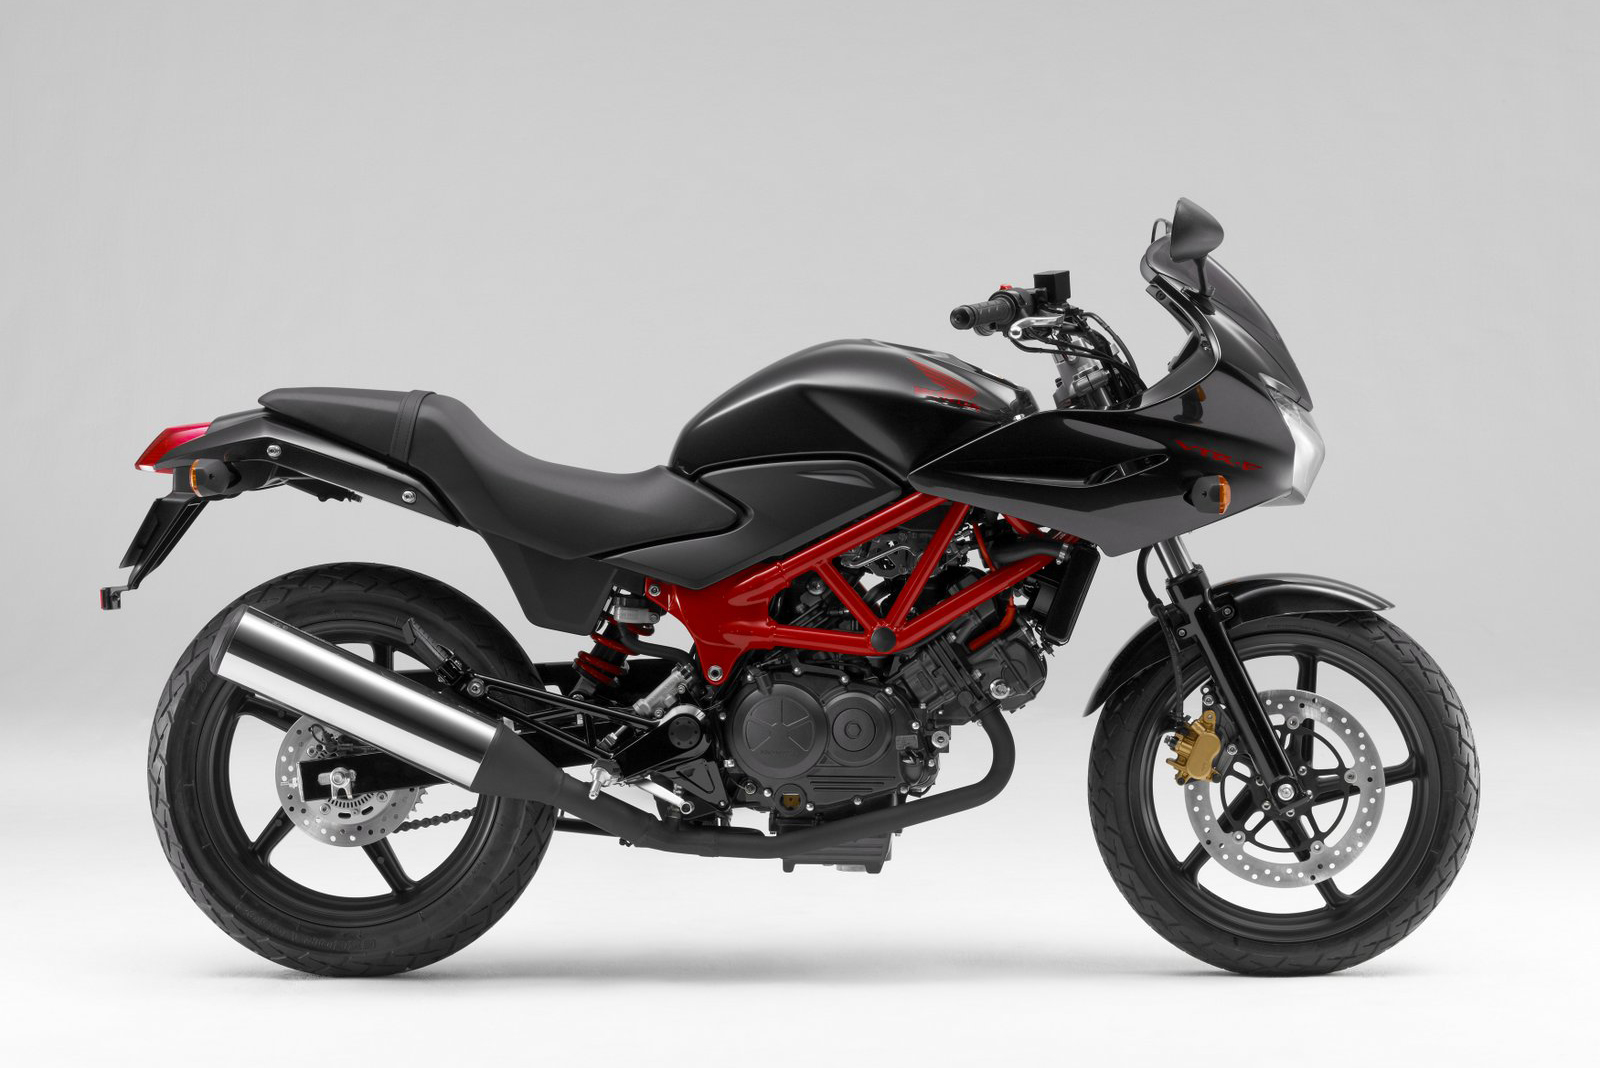 VTR250F launched in Japan